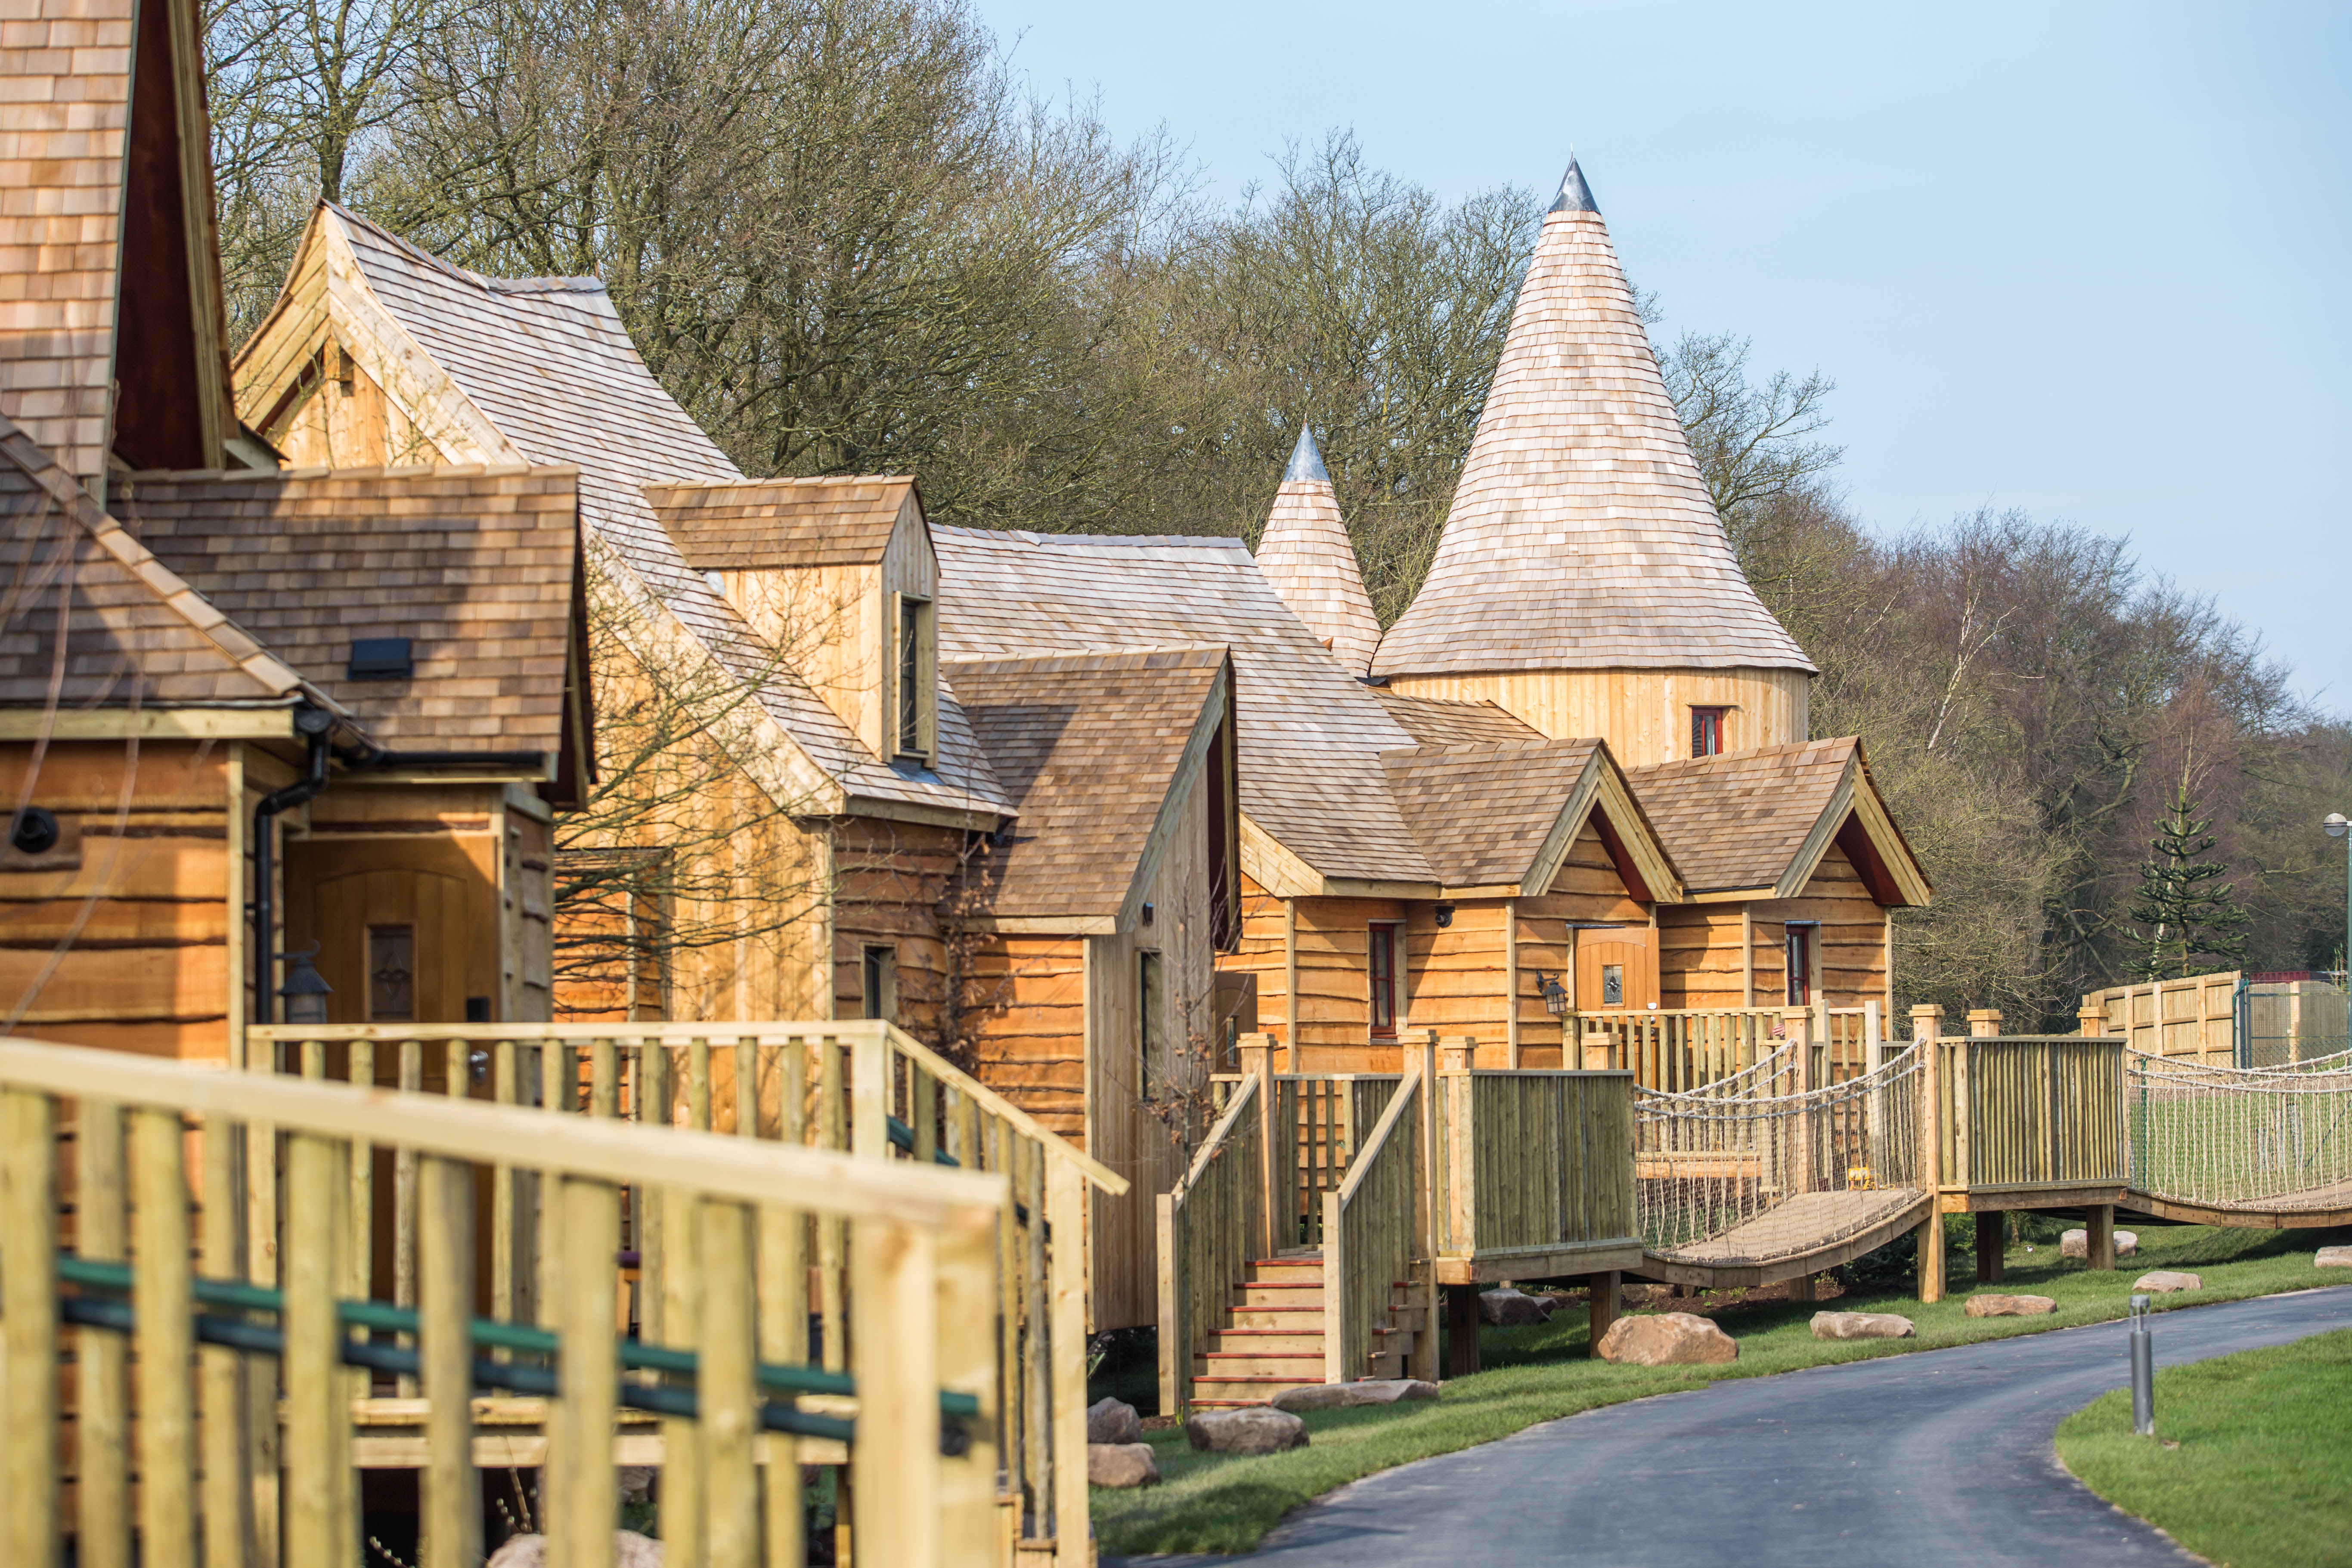 Enchanted Village Luxury Treehouses at the Alton Towers Resort